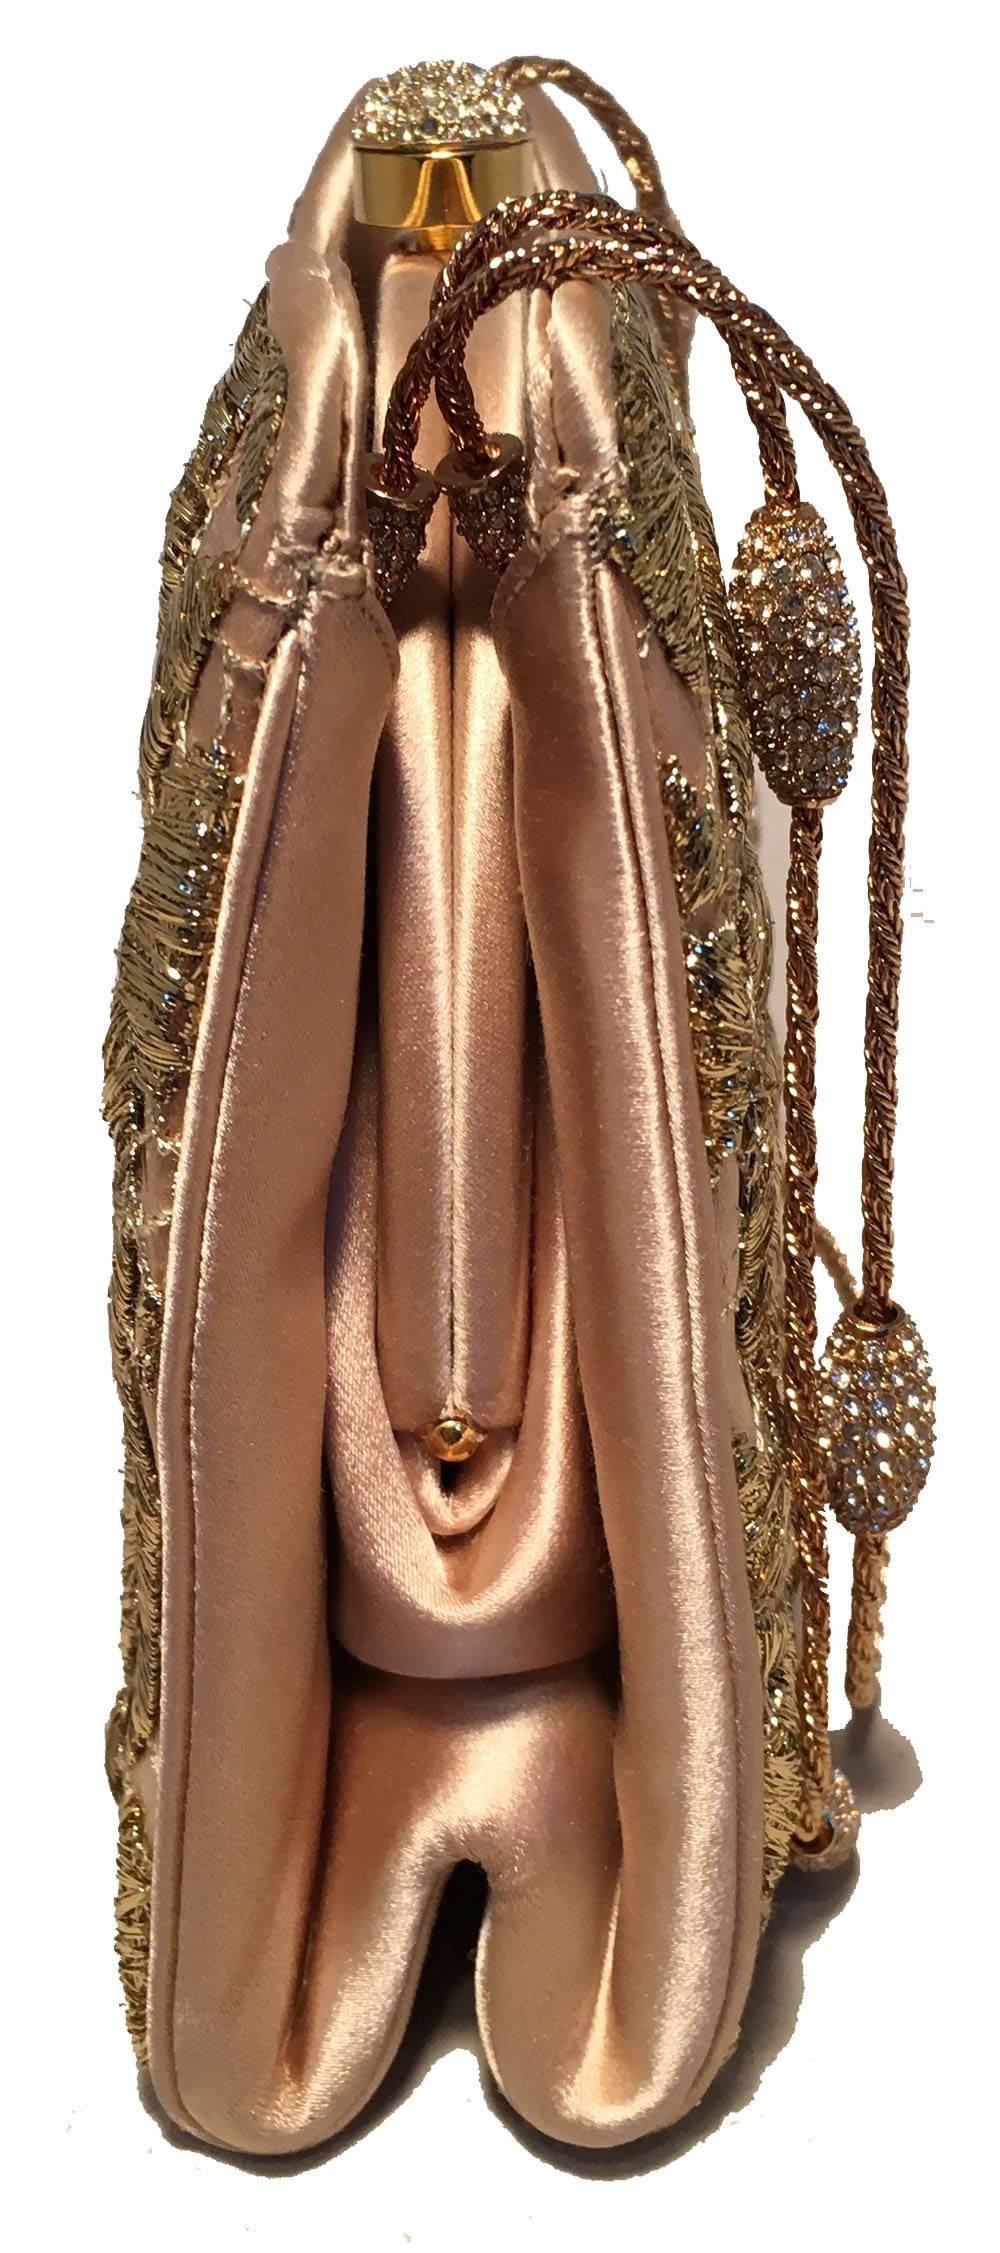 FABULOUS Judith Leiber Silk and Gold Embroidery Evening Bag in excellent condition.  Beige silk exterior with gold embroidered leaves throughout. Gold chain handles with clear crystal accents. Top button closure opens to a beige silk lined interior